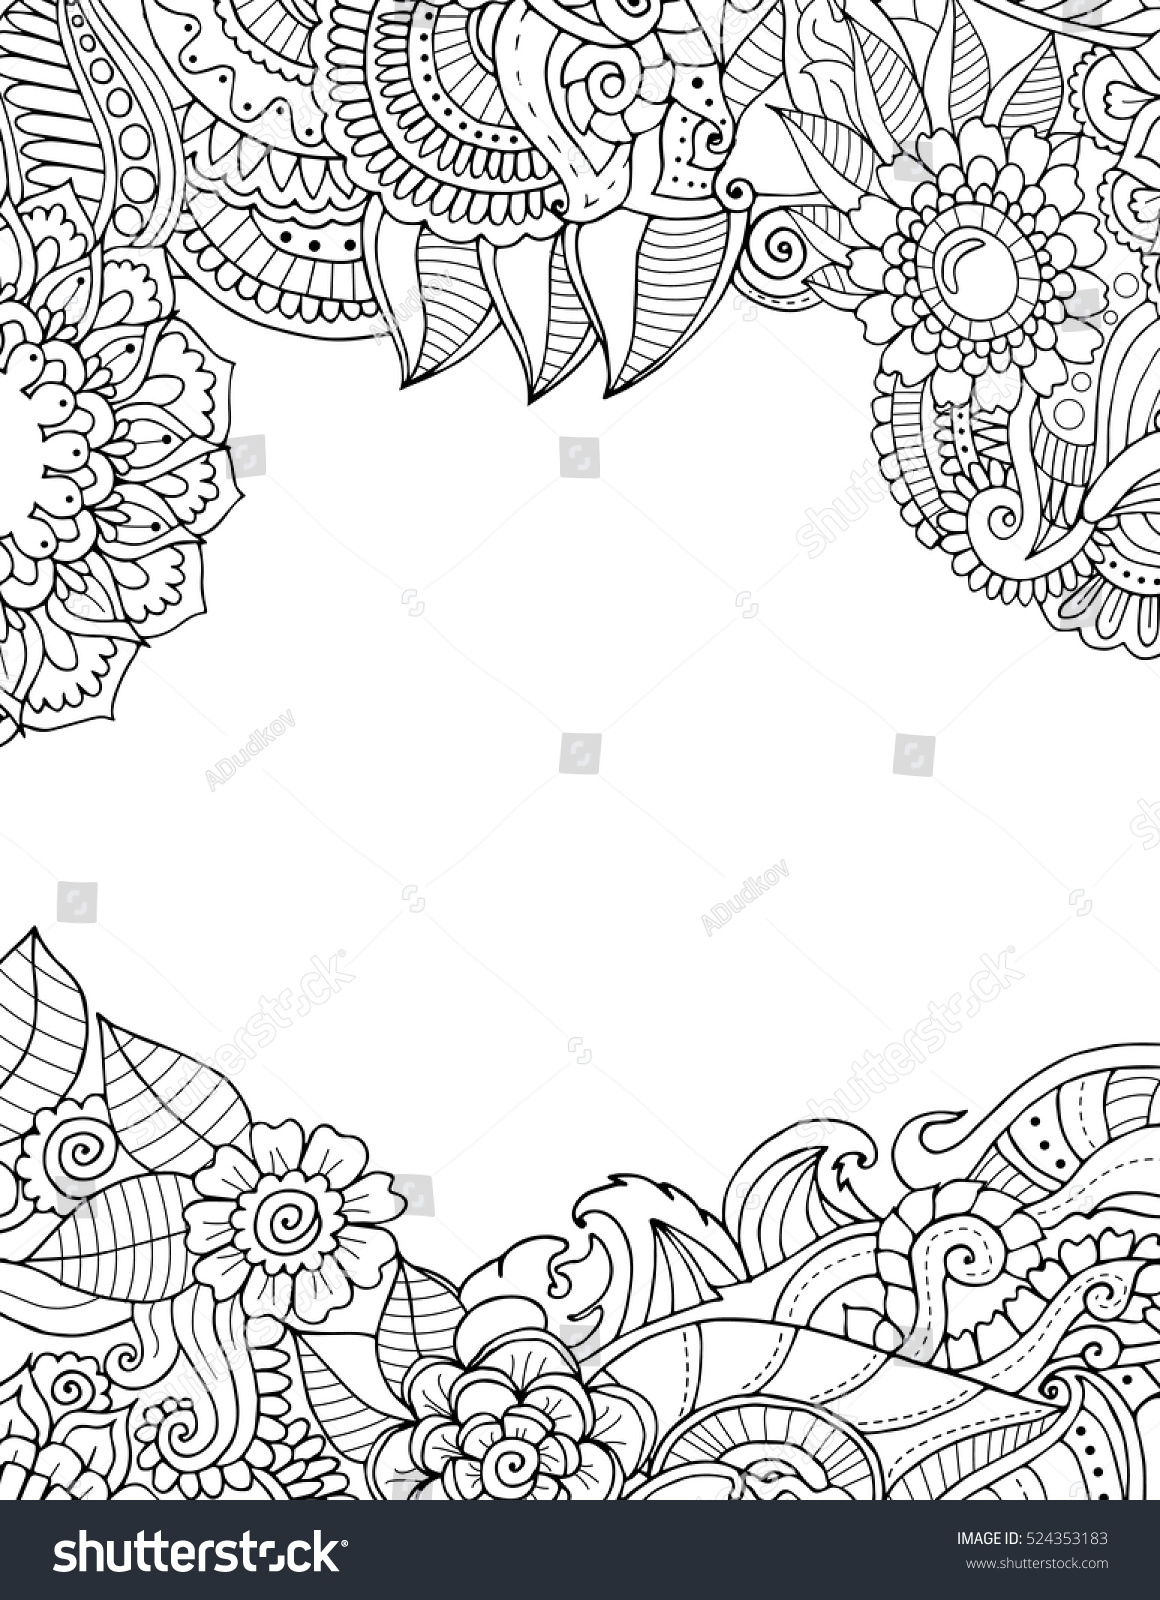 Abstract Hand Drawn Zentangle Style Vector Stock Vector Royalty